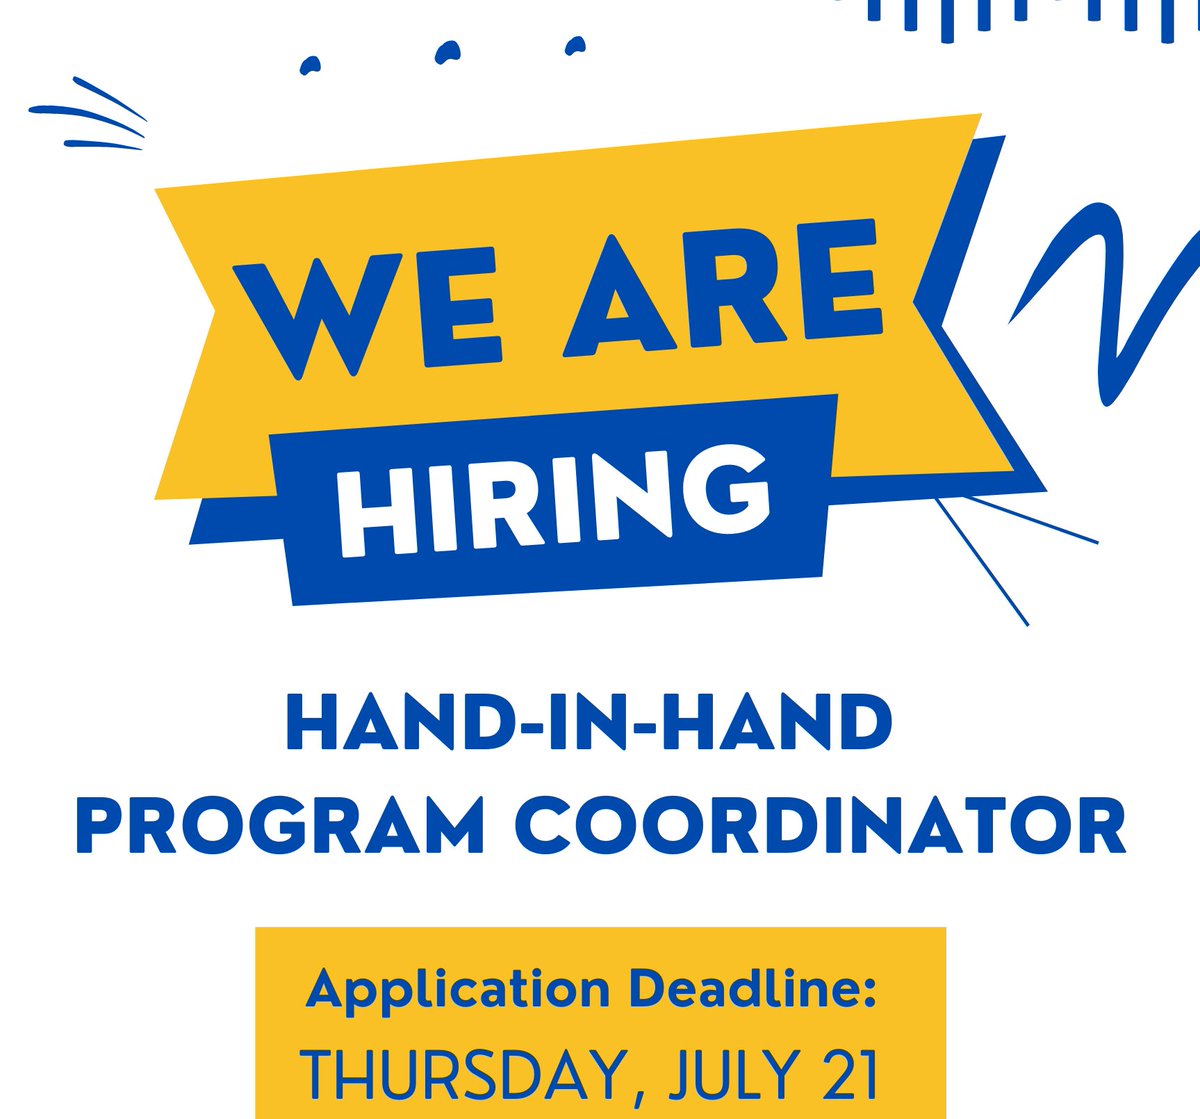 DFRC is looking for a Hand-in-Hand Program Coordinator to join the DFRC team! Please visit our website to view the full job description and submit a resume, cover letter, and list of references if interested. View the full job posting here: dfrc.org/about/careers.…